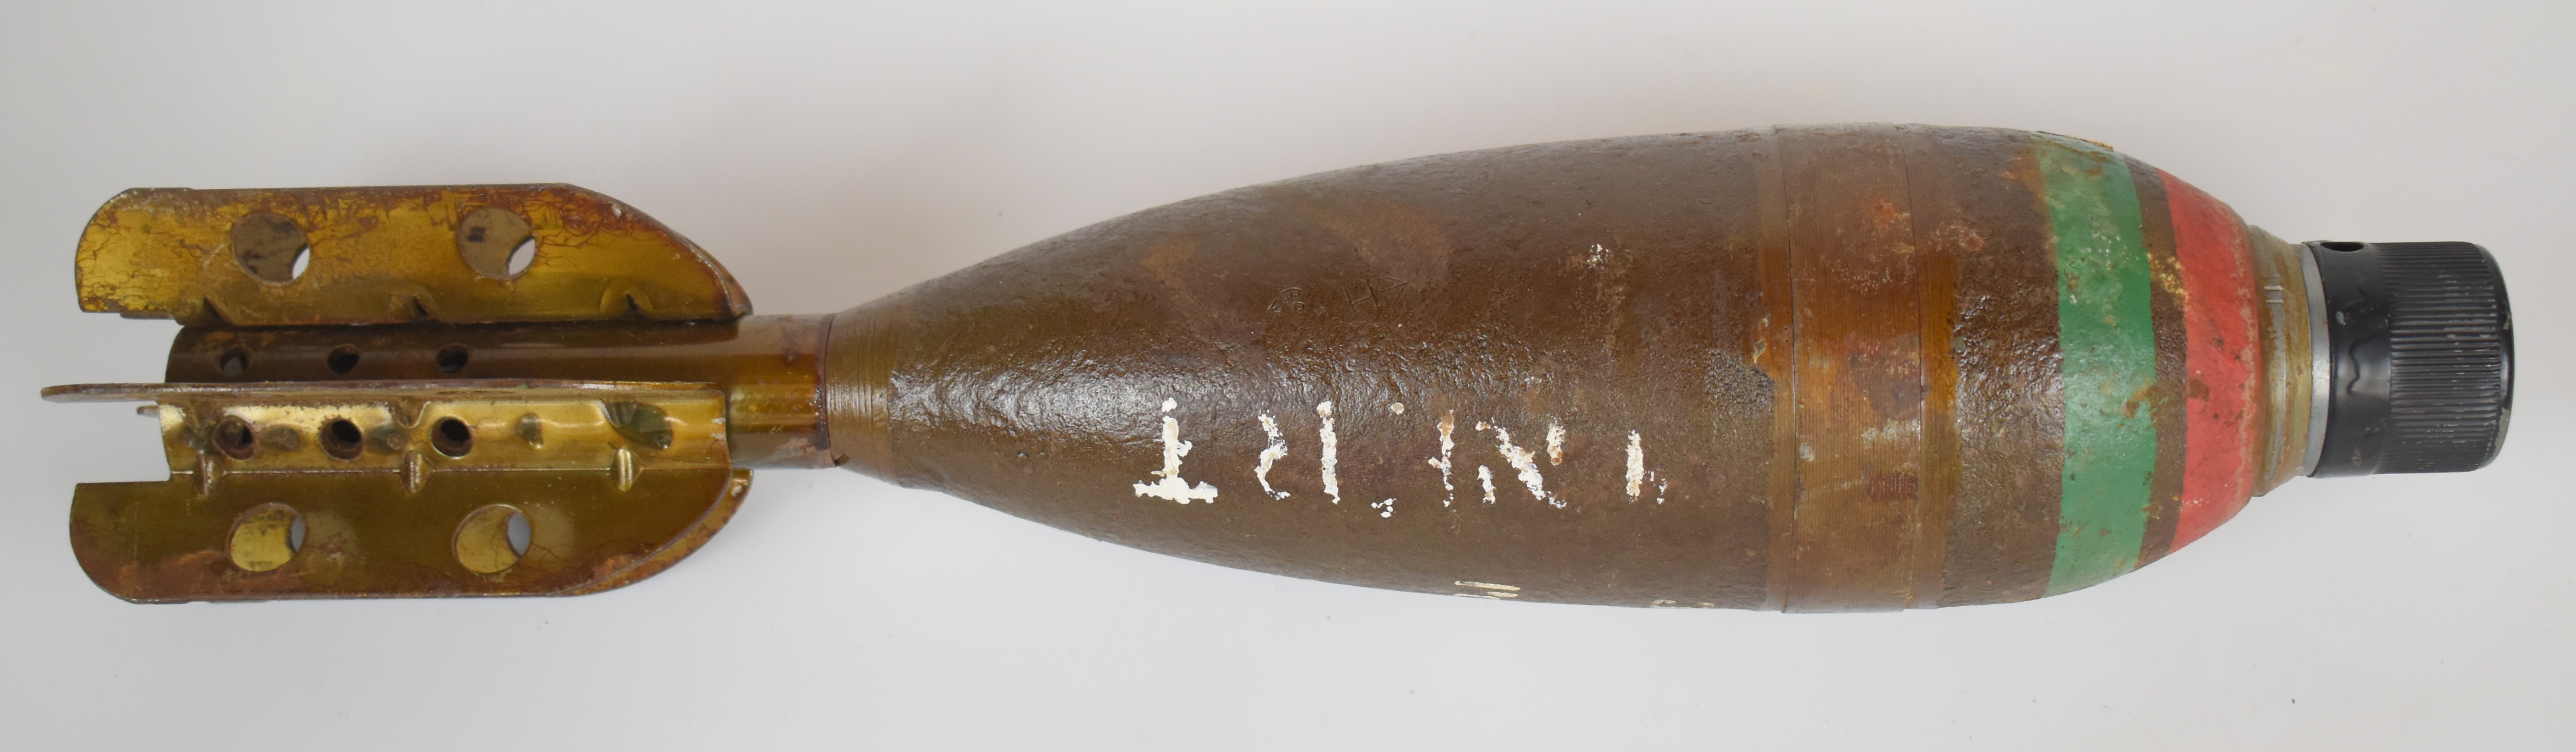 British WW2 3 inch inert mortar round dated 11/43 with fuse and cap - Image 2 of 2